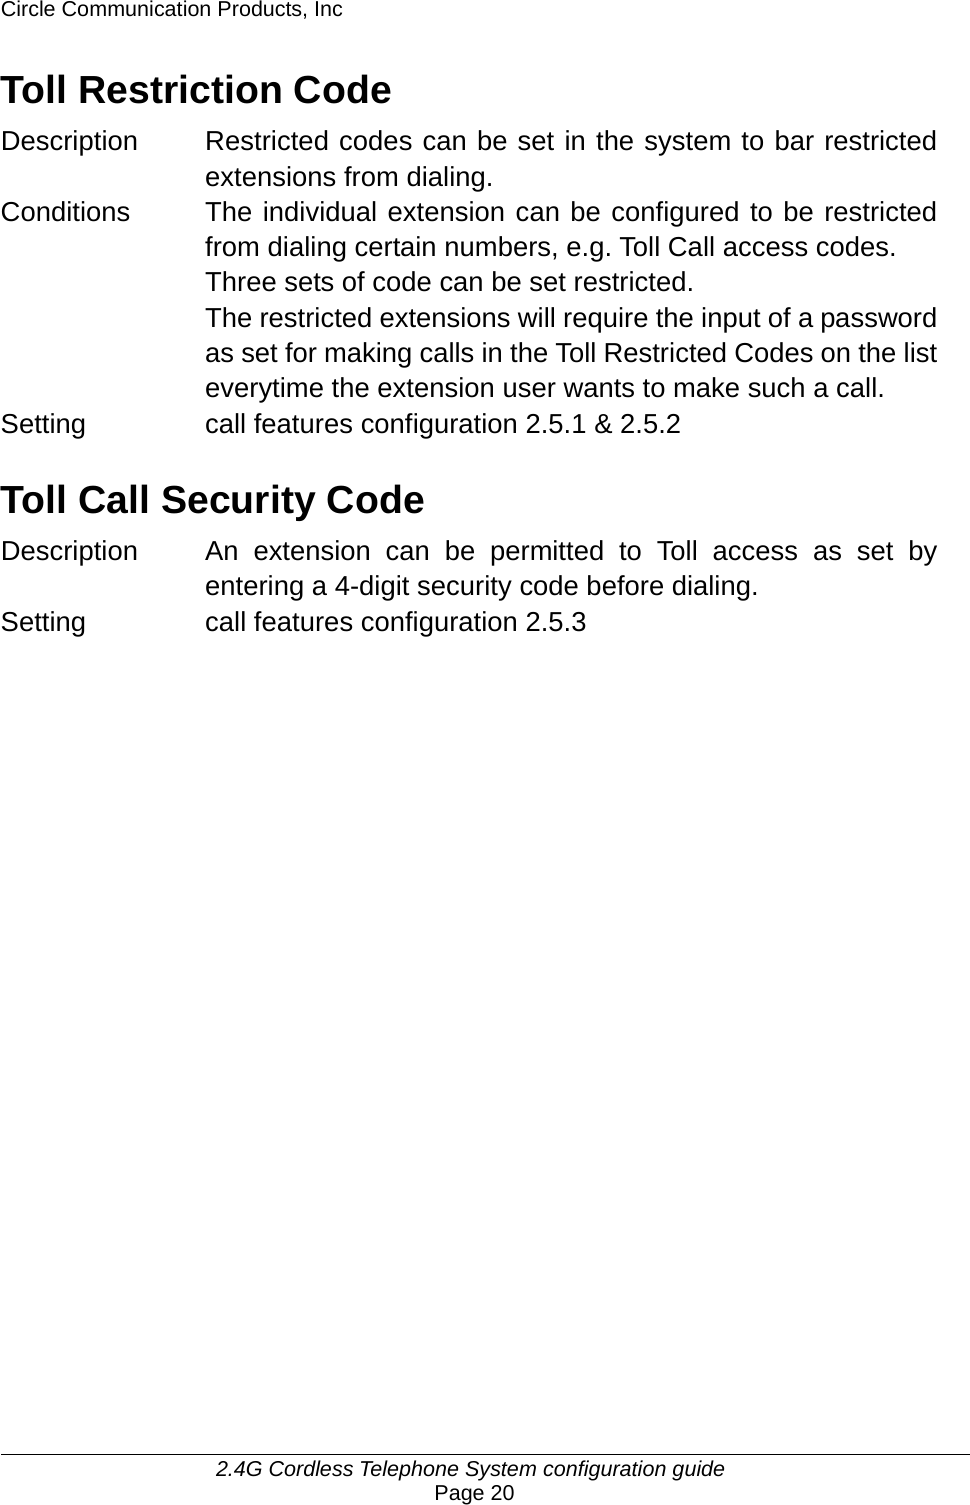 Circle Communication Products, Inc     2.4G Cordless Telephone System configuration guide Page 20 Toll Restriction Code Description  Restricted codes can be set in the system to bar restricted extensions from dialing. Conditions  The individual extension can be configured to be restricted from dialing certain numbers, e.g. Toll Call access codes. Three sets of code can be set restricted. The restricted extensions will require the input of a password as set for making calls in the Toll Restricted Codes on the list everytime the extension user wants to make such a call. Setting  call features configuration 2.5.1 &amp; 2.5.2  Toll Call Security Code Description  An extension can be permitted to Toll access as set by entering a 4-digit security code before dialing. Setting call features configuration 2.5.3 